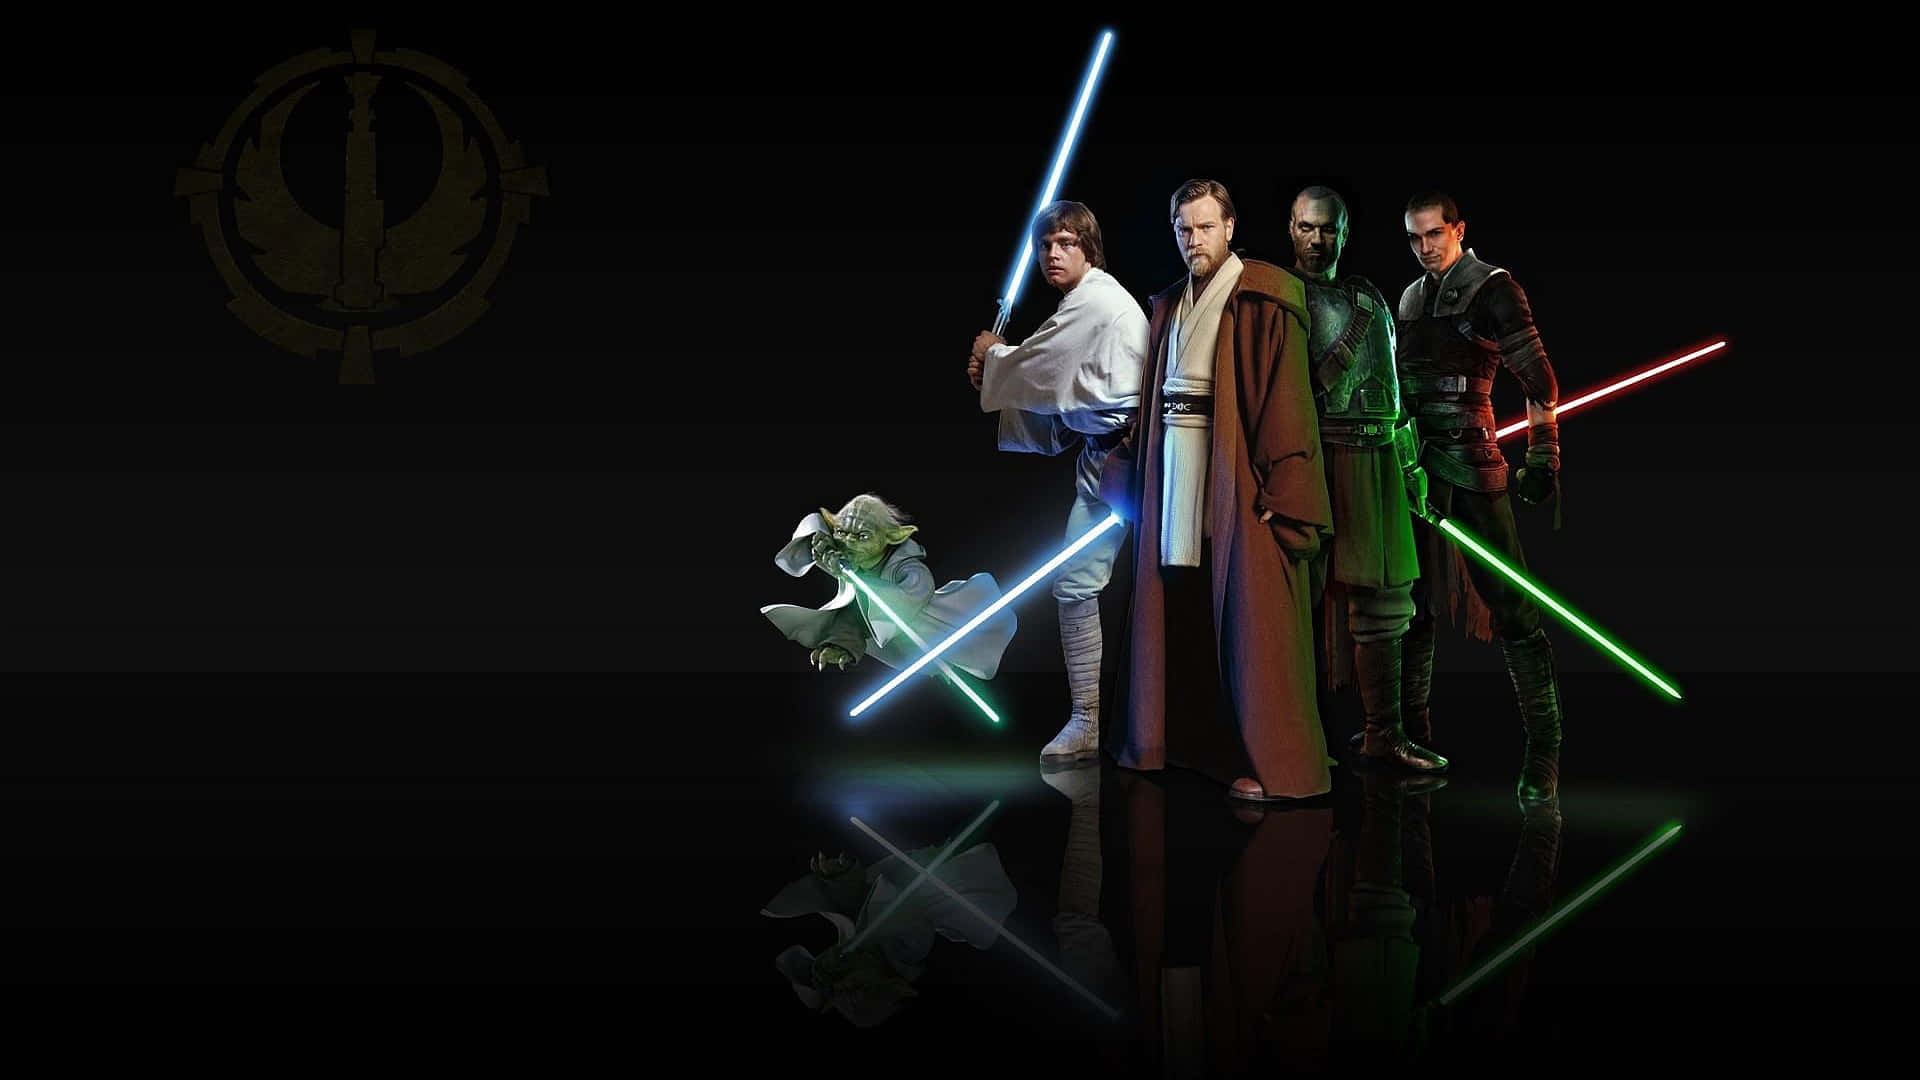 “The bond between a Jedi and their lightsaber is one of the most powerful forces” Wallpaper